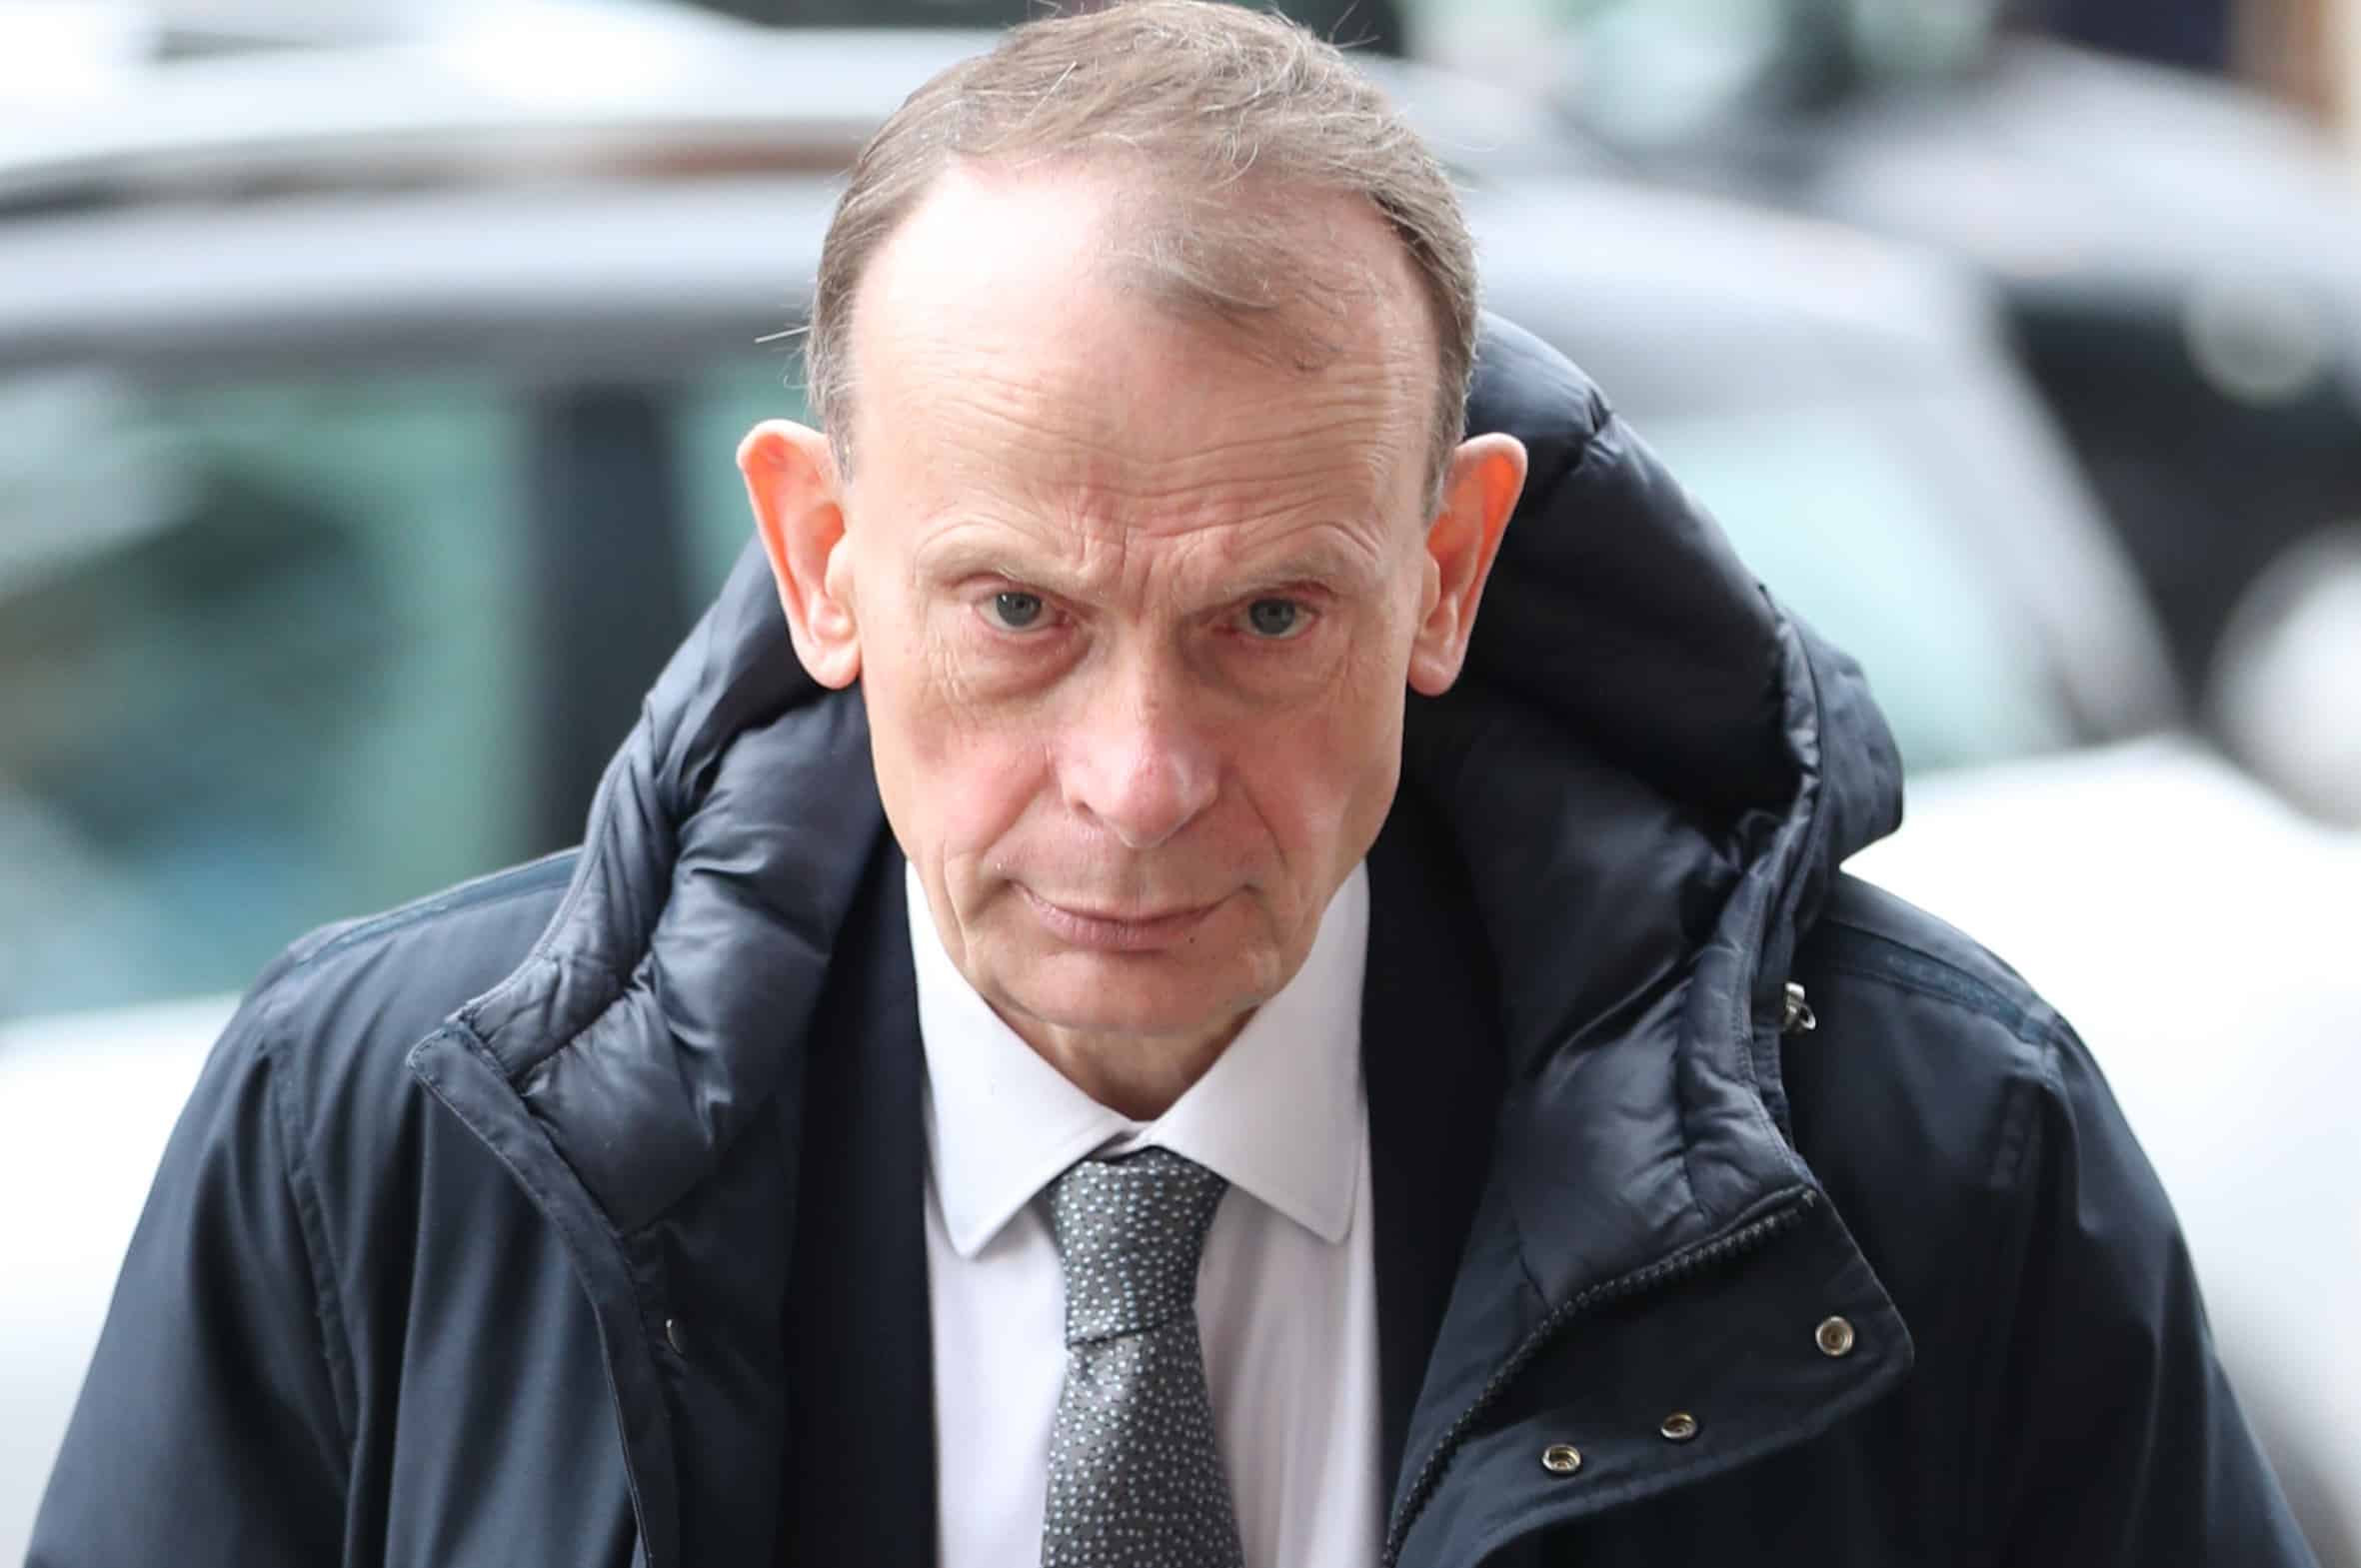 Andrew Marr’s ‘perfect précis’ of where we’re at goes viral